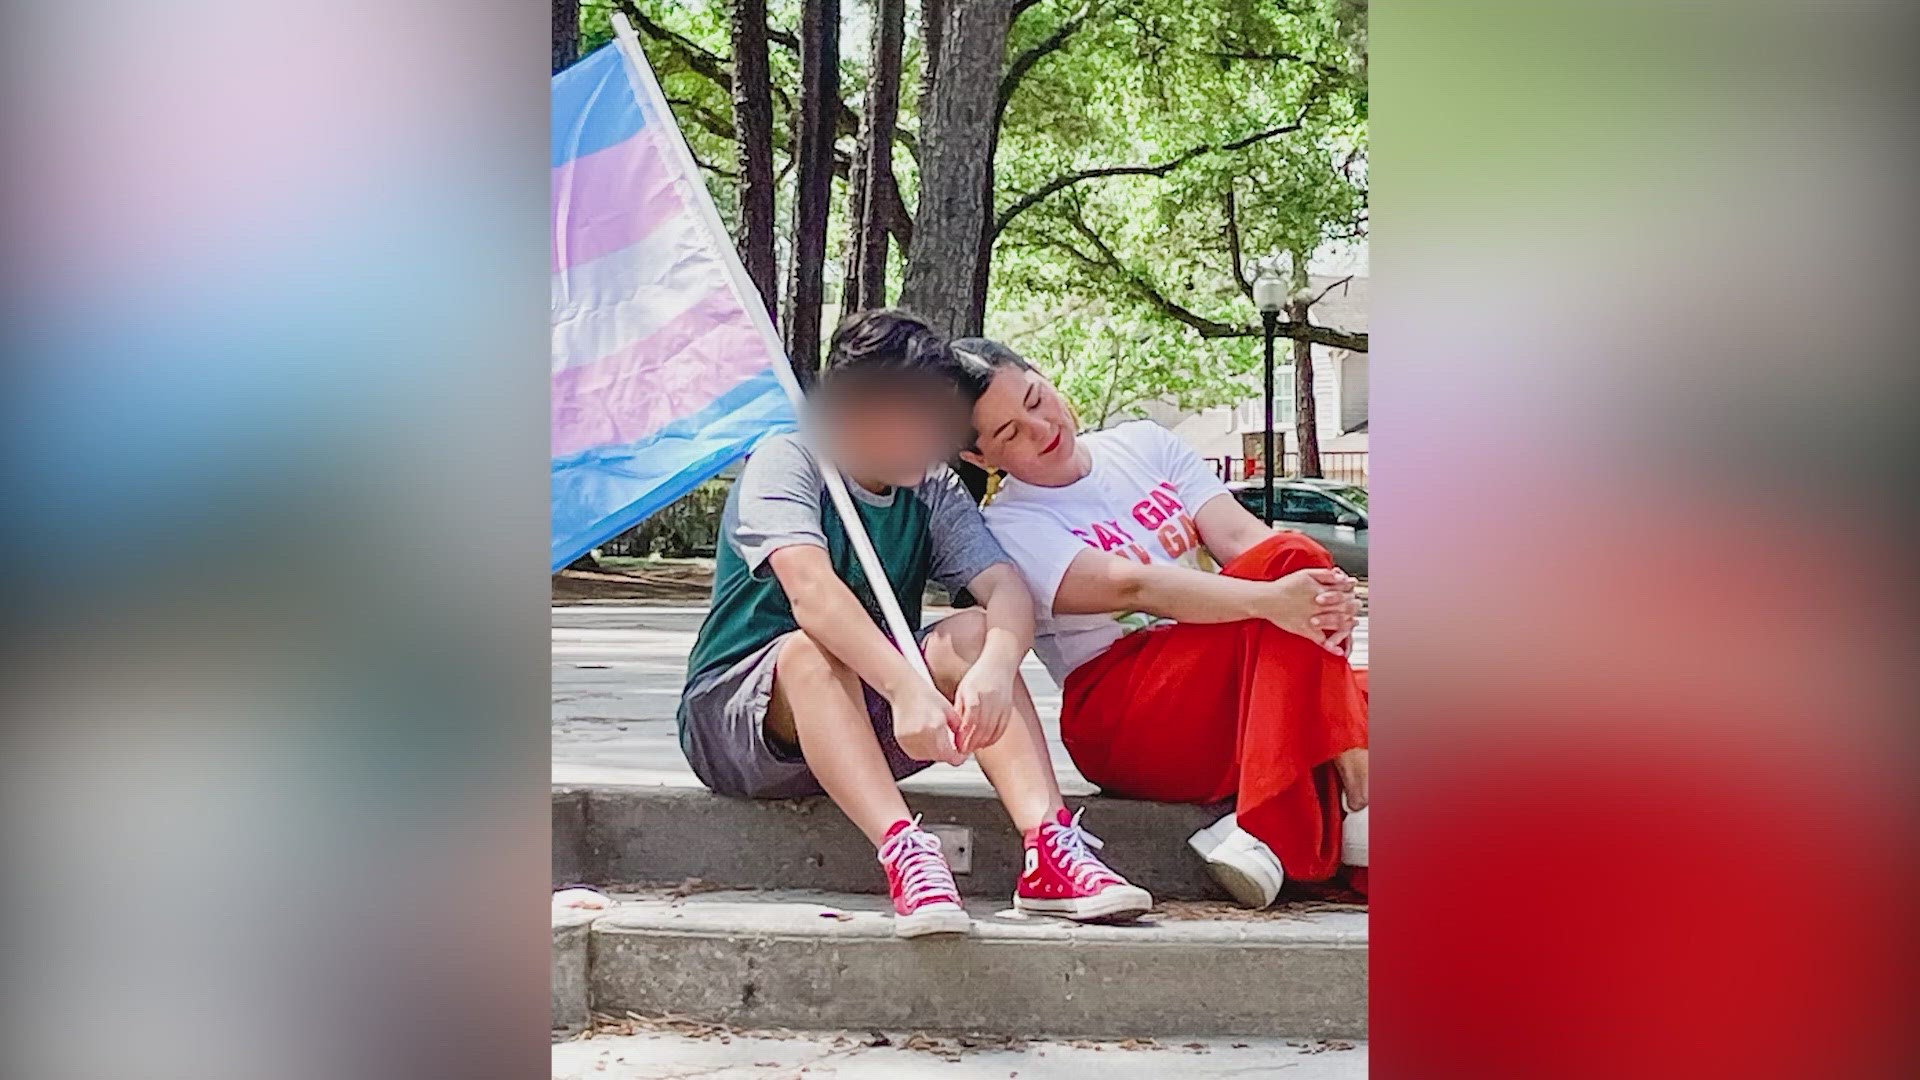 Doctors in Texas won’t be allowed to provide gender-affirming care to her young son because of Senate Bill 14.